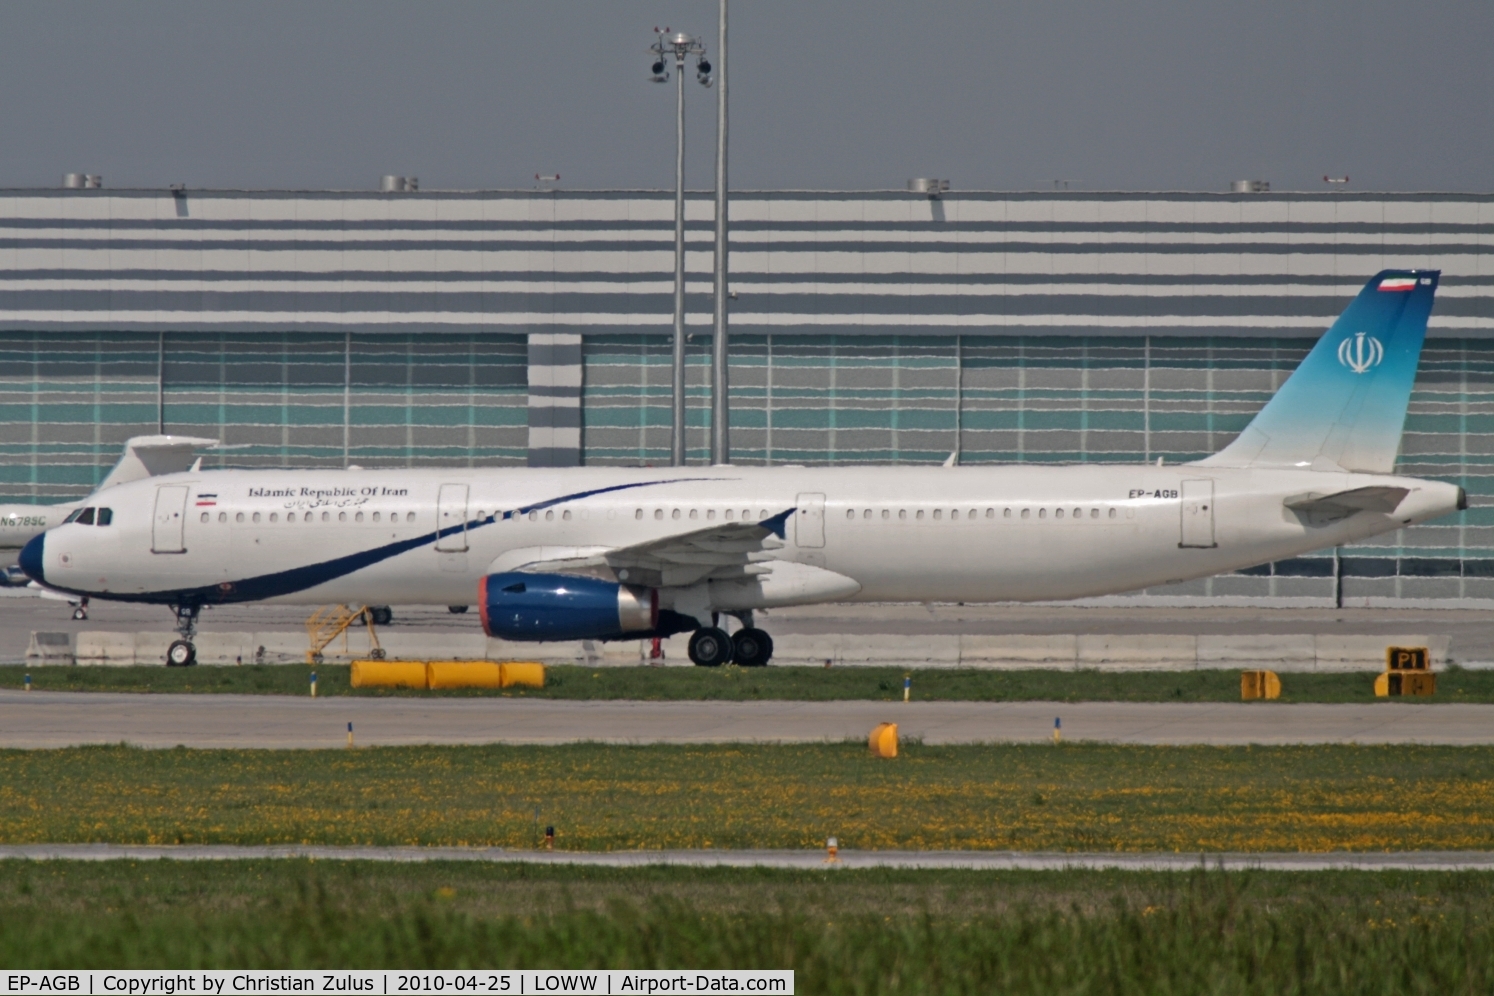 EP-AGB, 2000 Airbus A321-231 C/N 1202, Iran Government